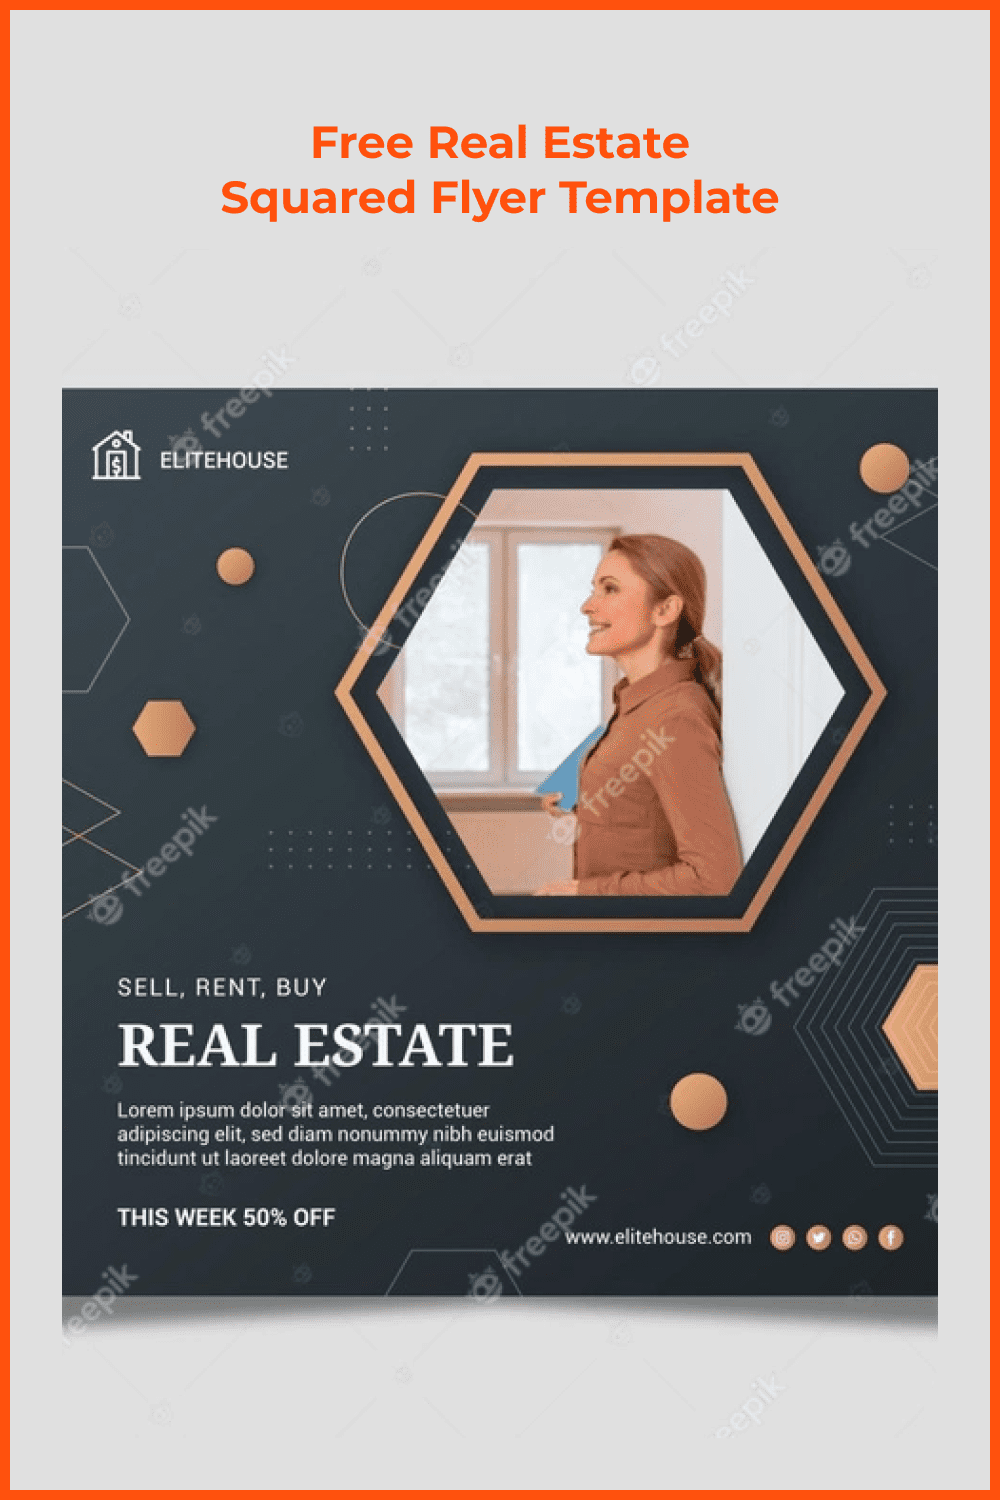 Real estate squared flyer template.